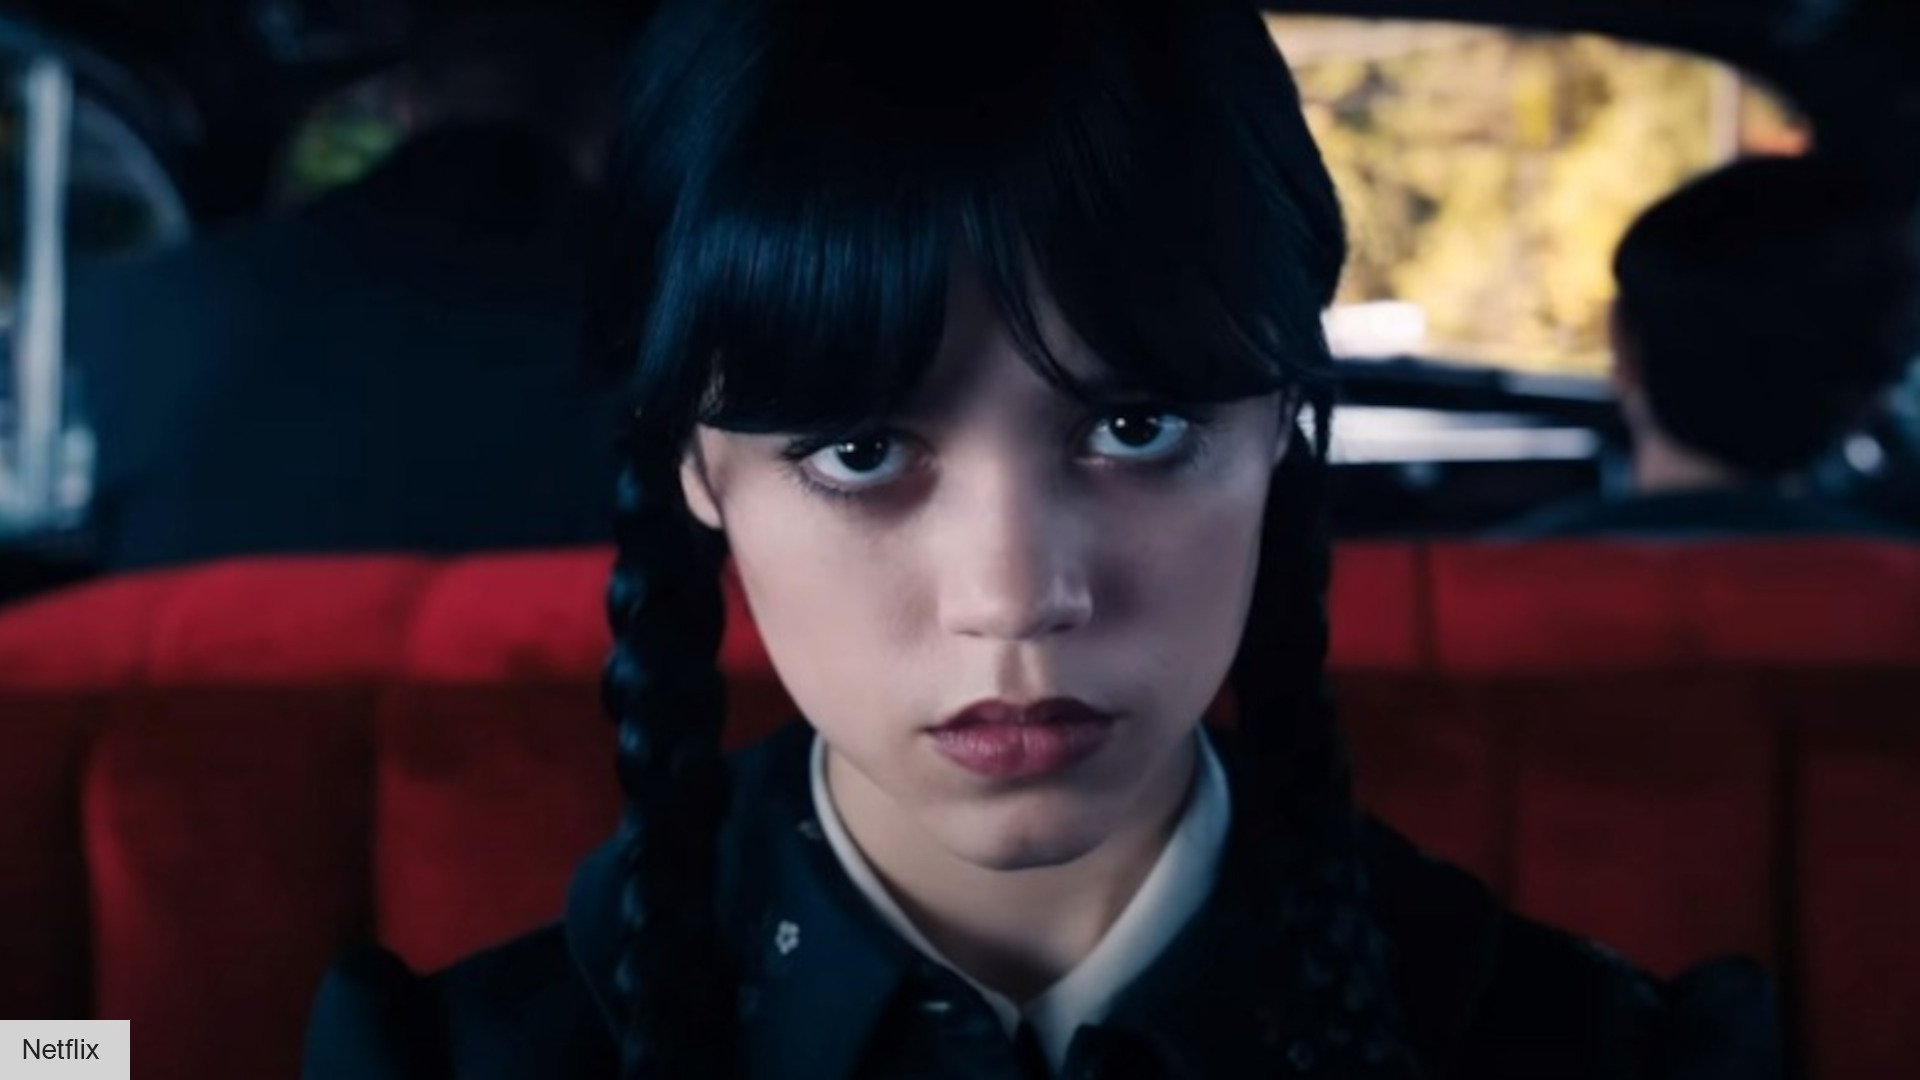 Who is playing Wednesday Addams in the Netflix series?